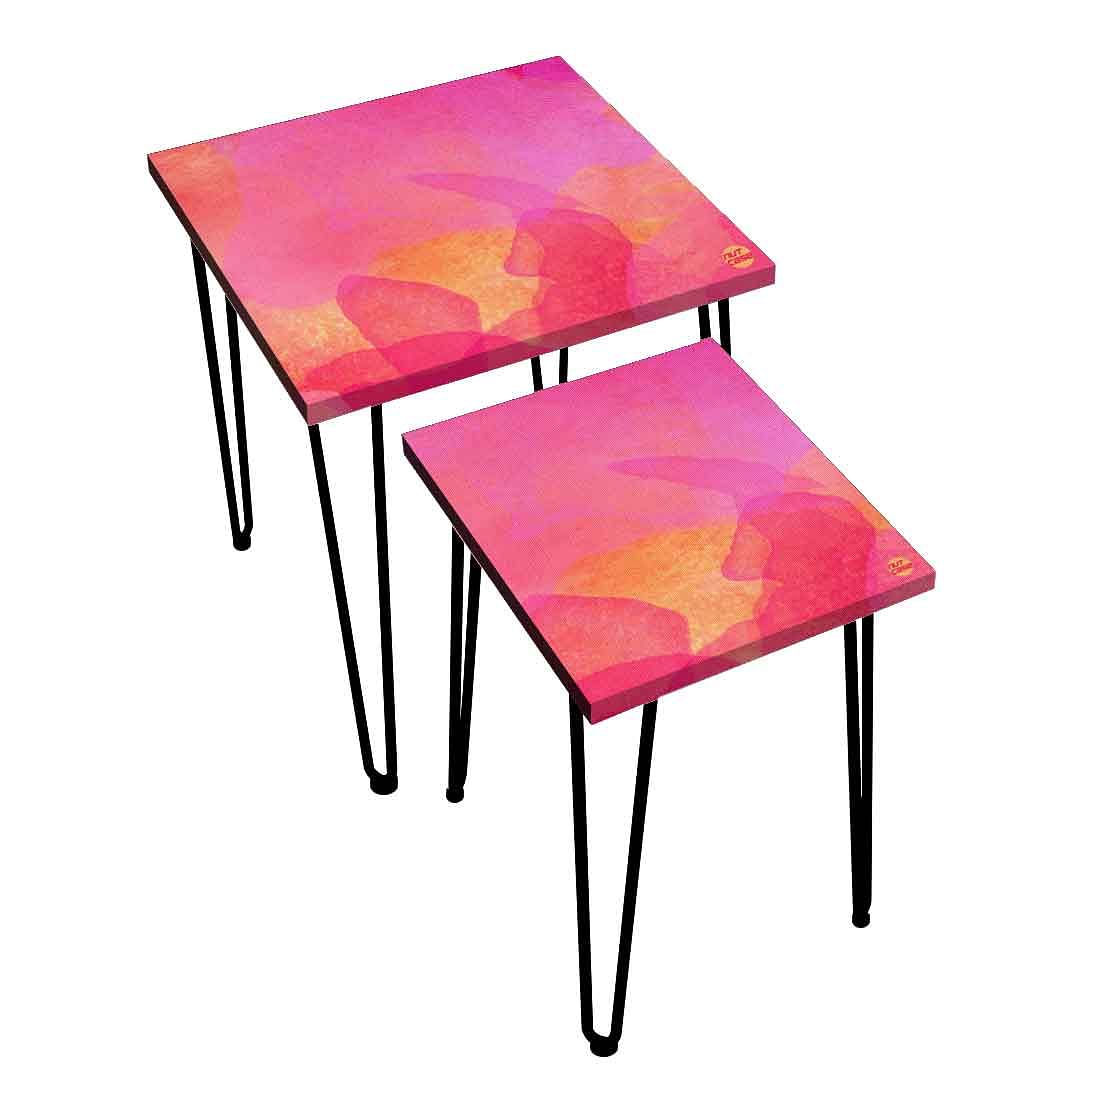 Nesting End Tables Modern Decor for Home and Office Set of 2 - Pink Watercolor Nutcase